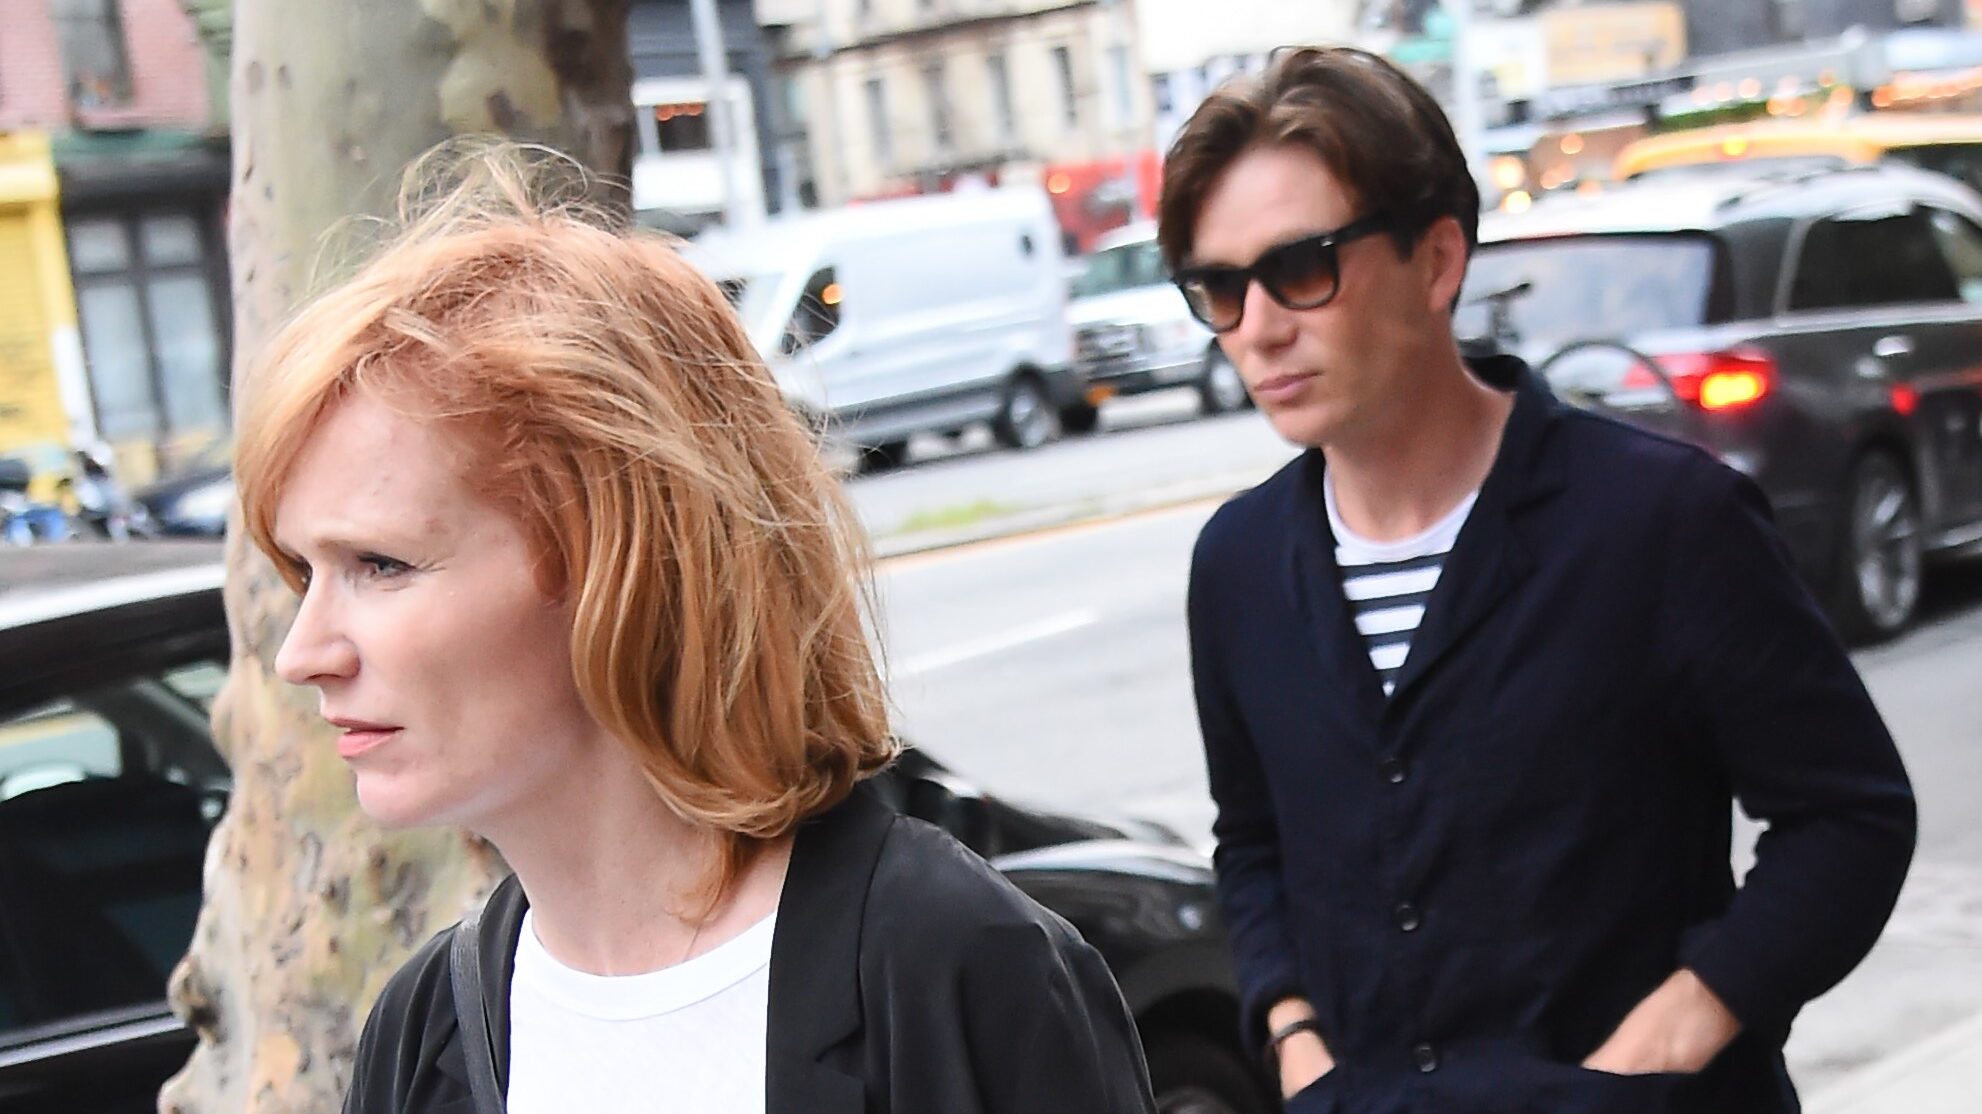 Yvonne McGuinness and Cillian Murphy walking together 